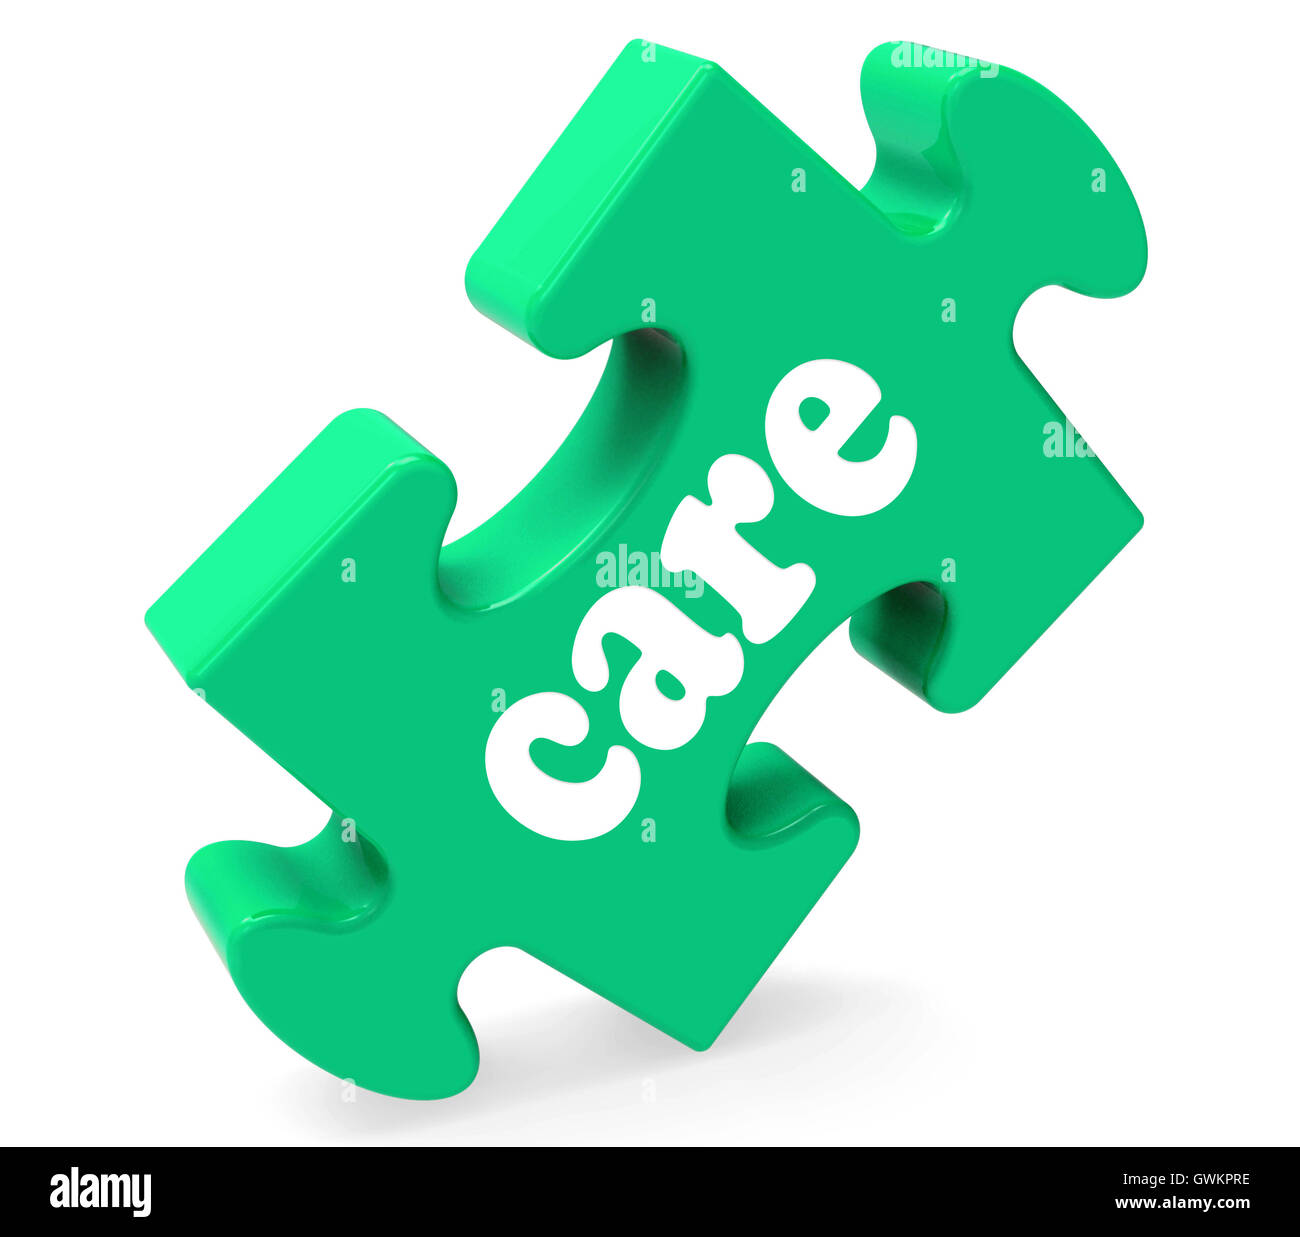 Care Puzzle Means Healthcare Careful Or Caring Stock Photo